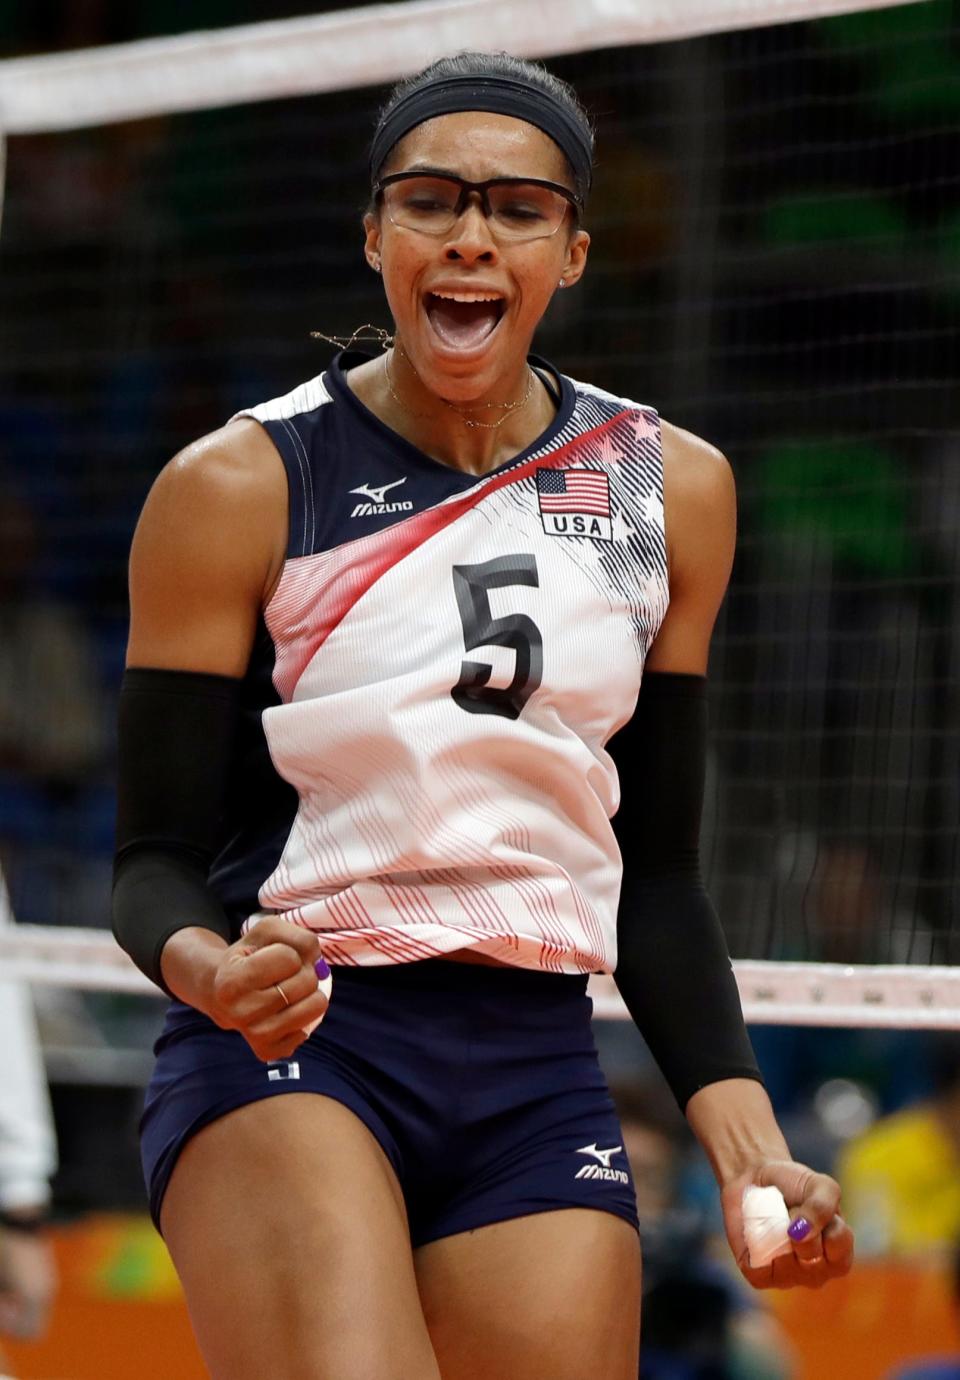 United States' Rachael Adams celebrates during a women's preliminary volleyball match against Puerto Rico at the 2016 Summer Olympics in Rio de Janeiro, Brazil, Saturday, Aug. 6, 2016.